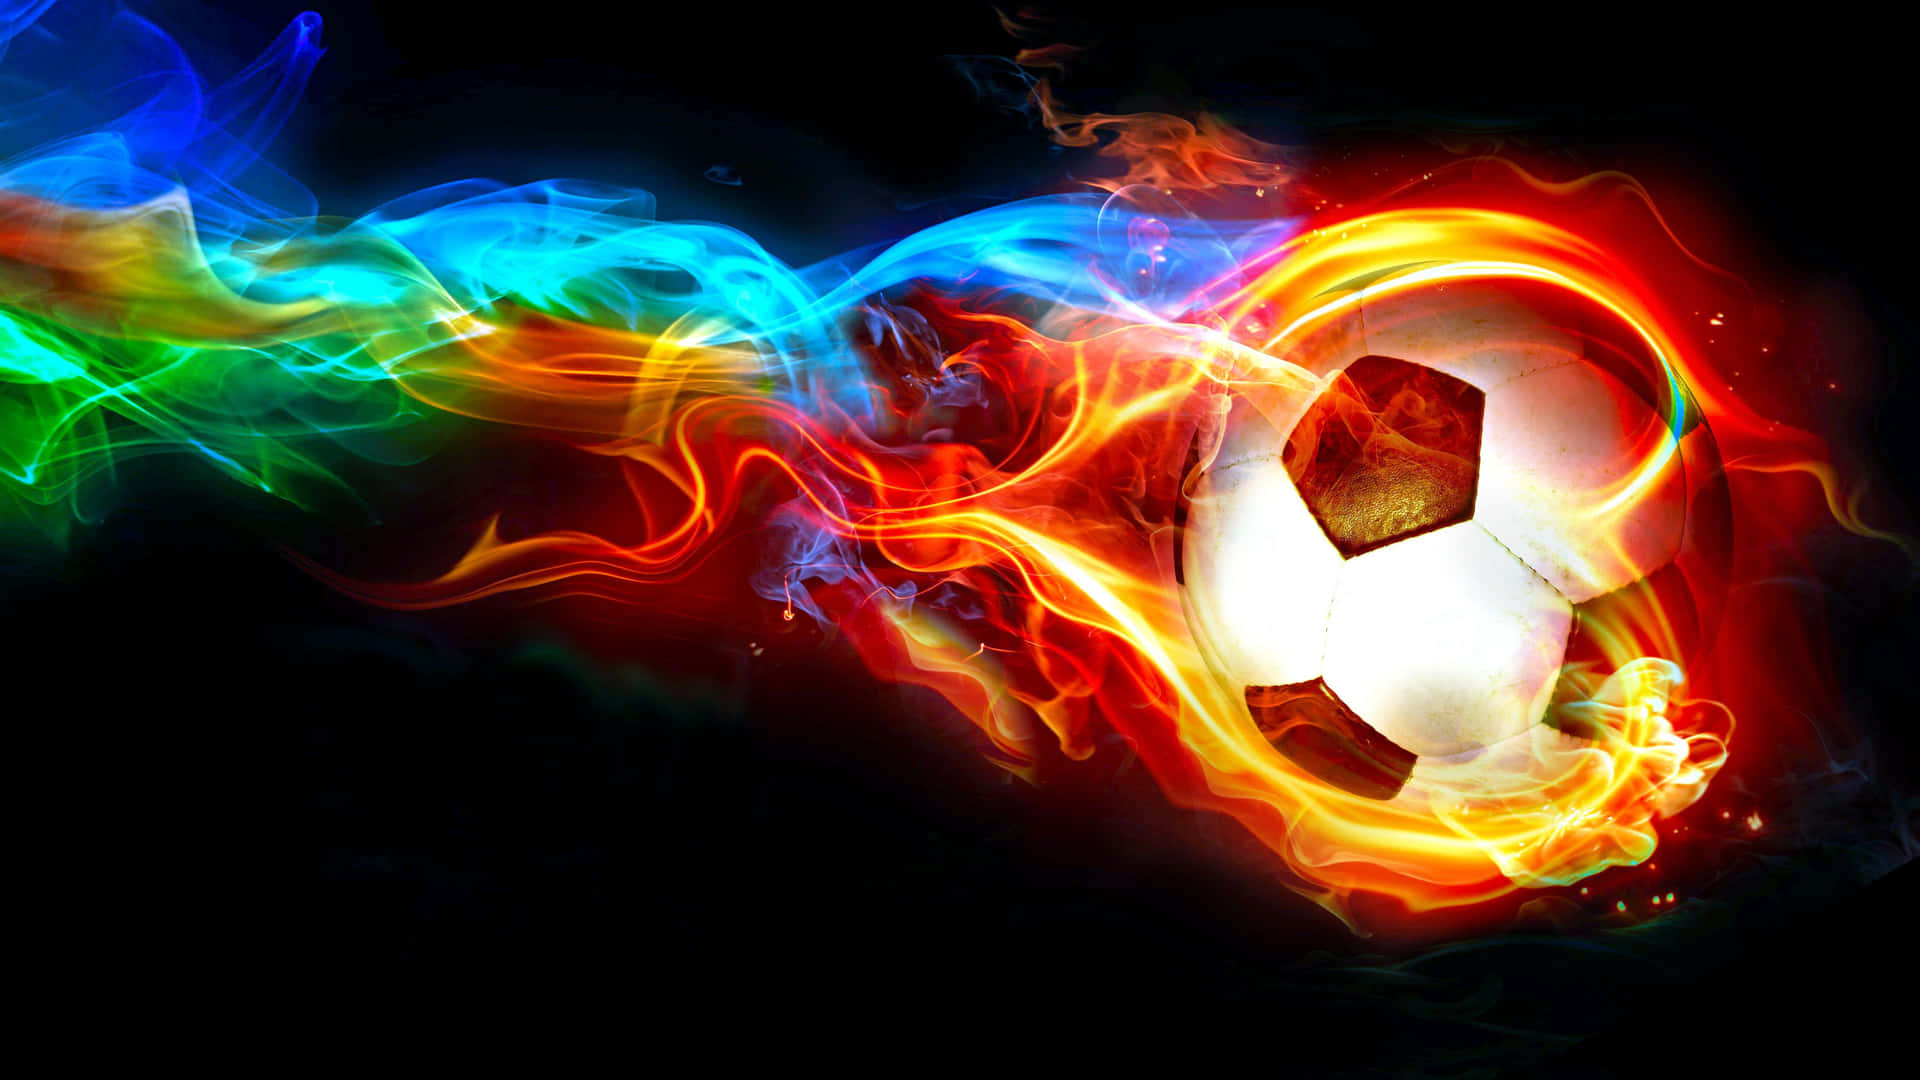 "Light up the Field with Football On Fire!" Wallpaper